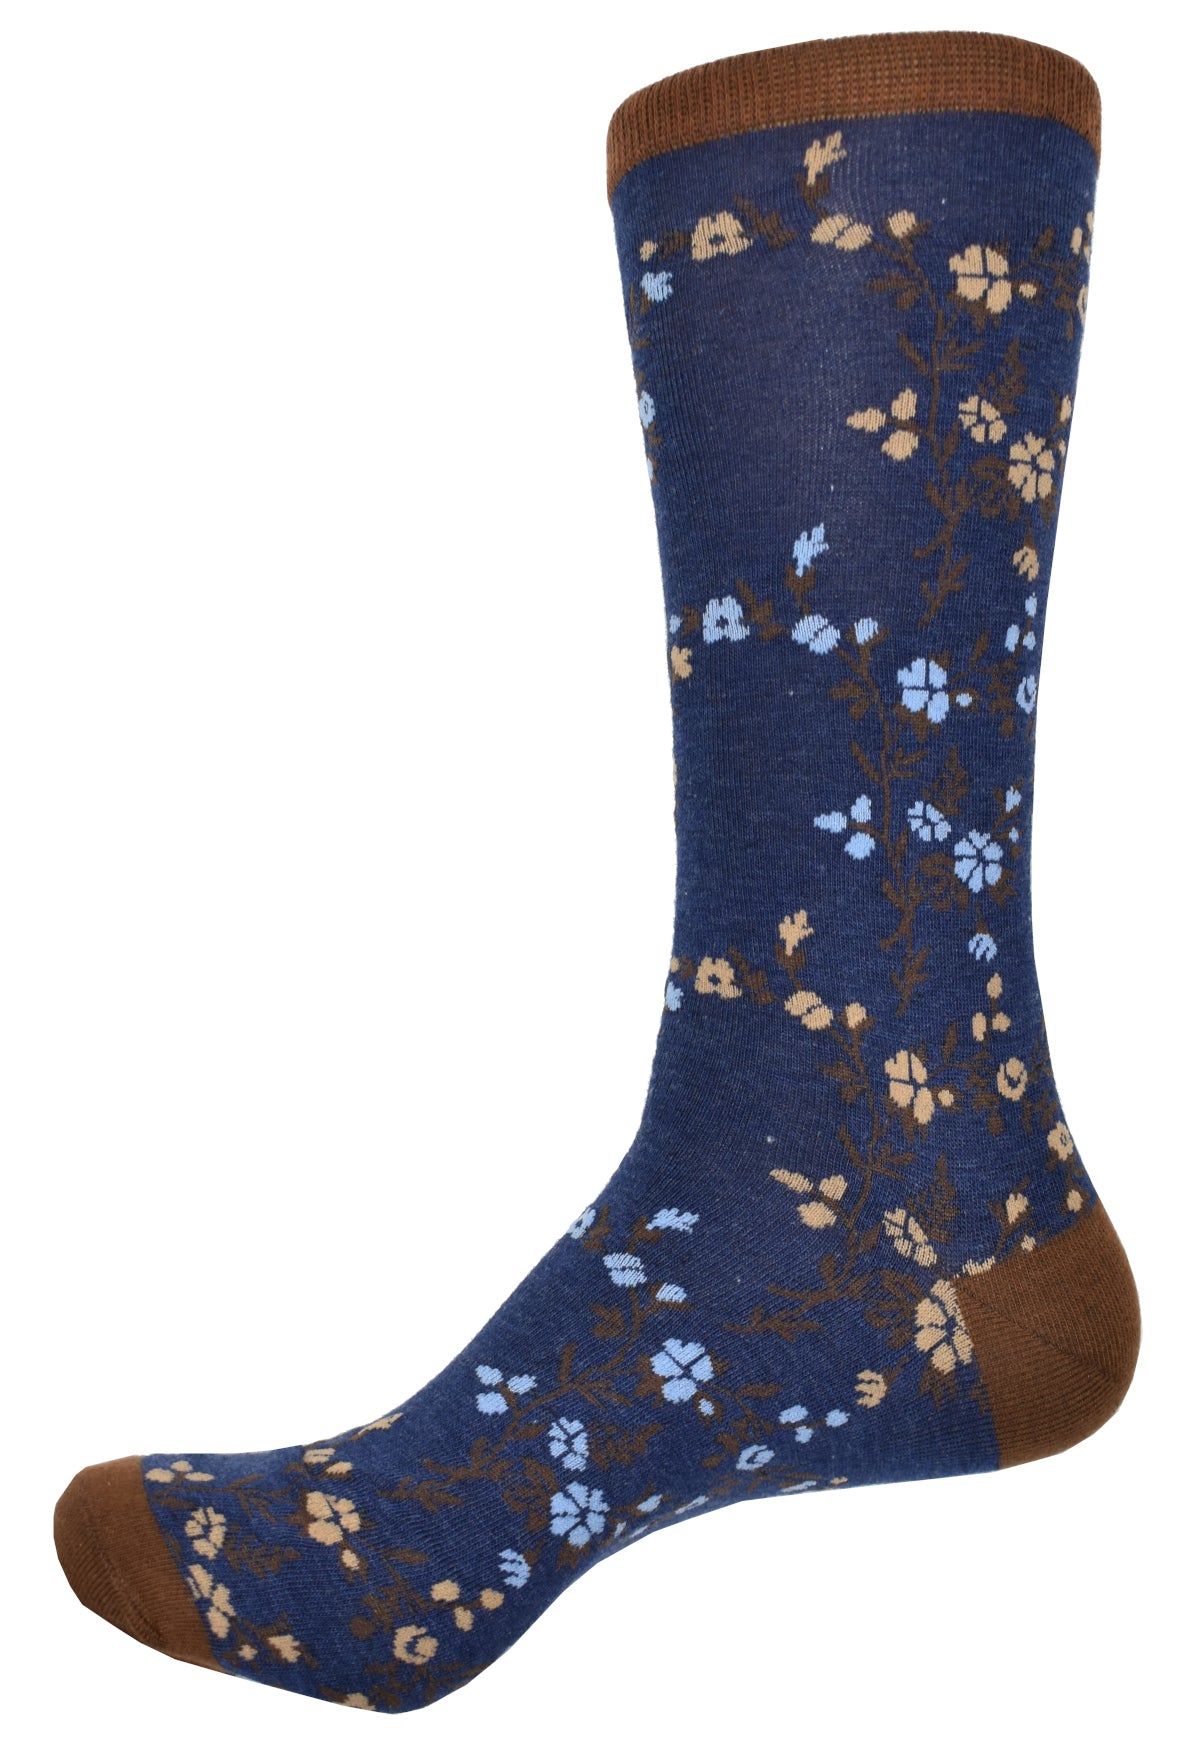 Brighten up your wardrobe with this ZJ8065 Floral Sock. Adorned with a traditional floral pattern, the rich mercerized cotton fabric and indigo color is sure to bring a trendy touch to your ensemble. Marcello Socks.